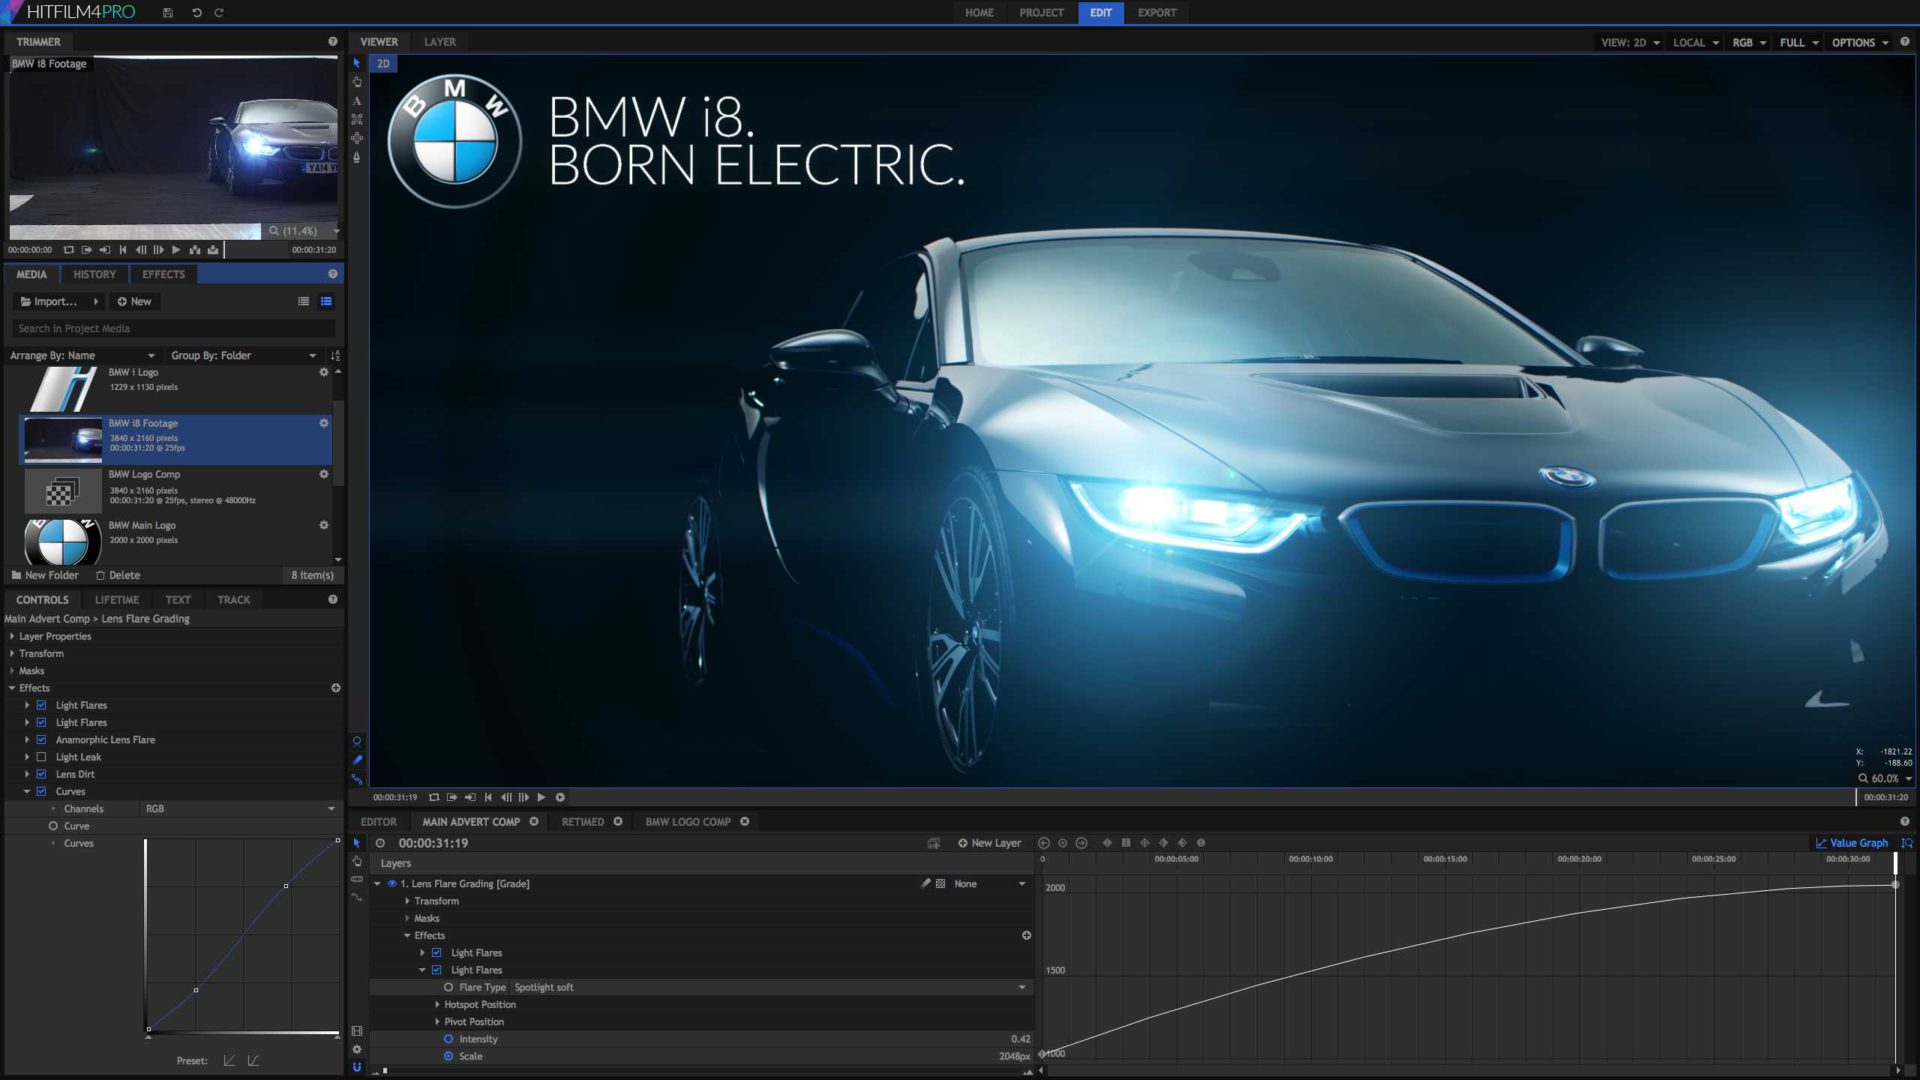 BMW effects in HitFilm Pro
